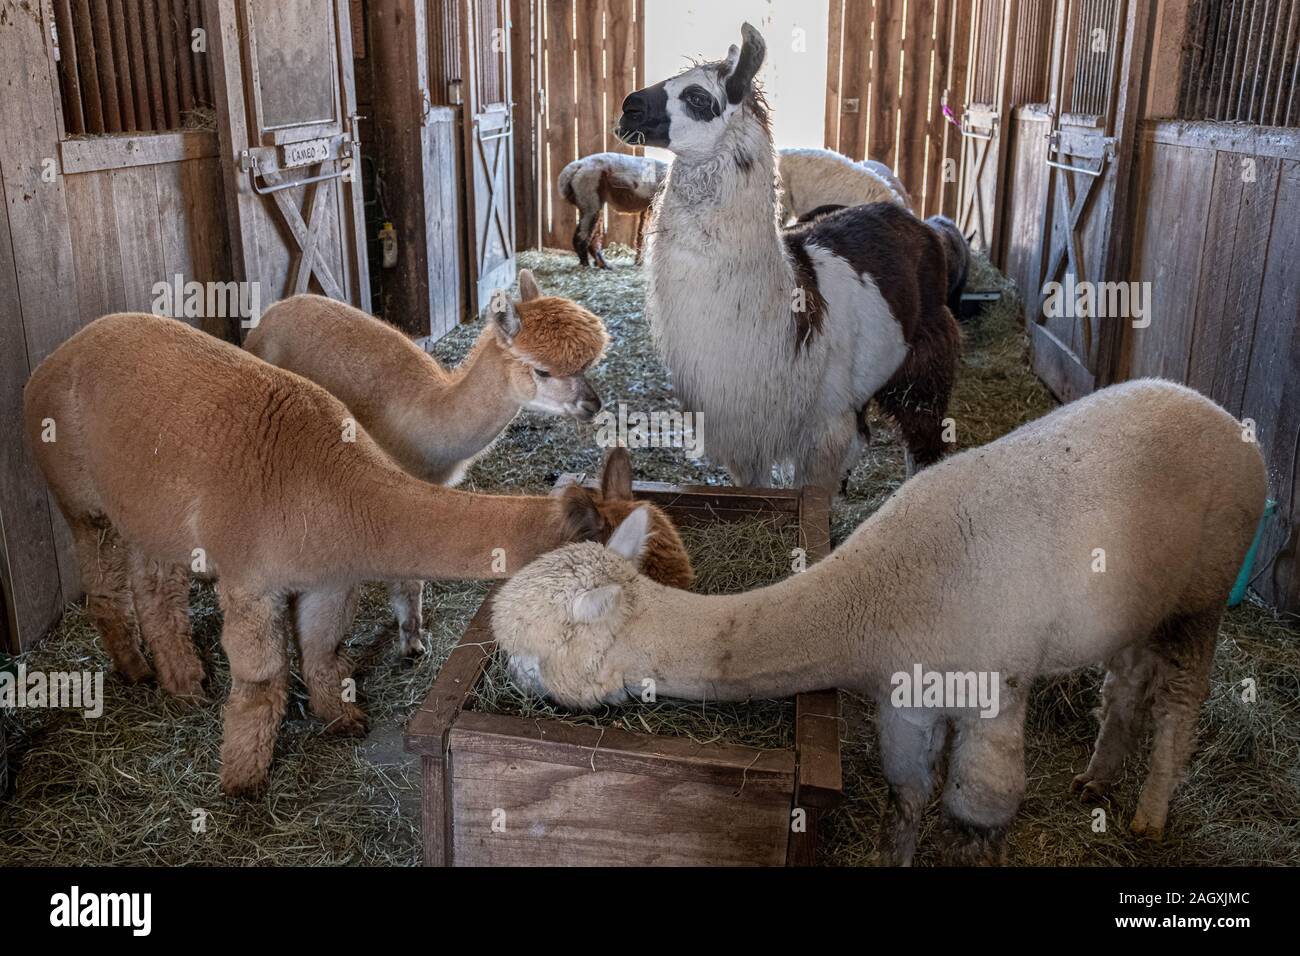 One llama and several alpacas eating in the barn Stock Photo